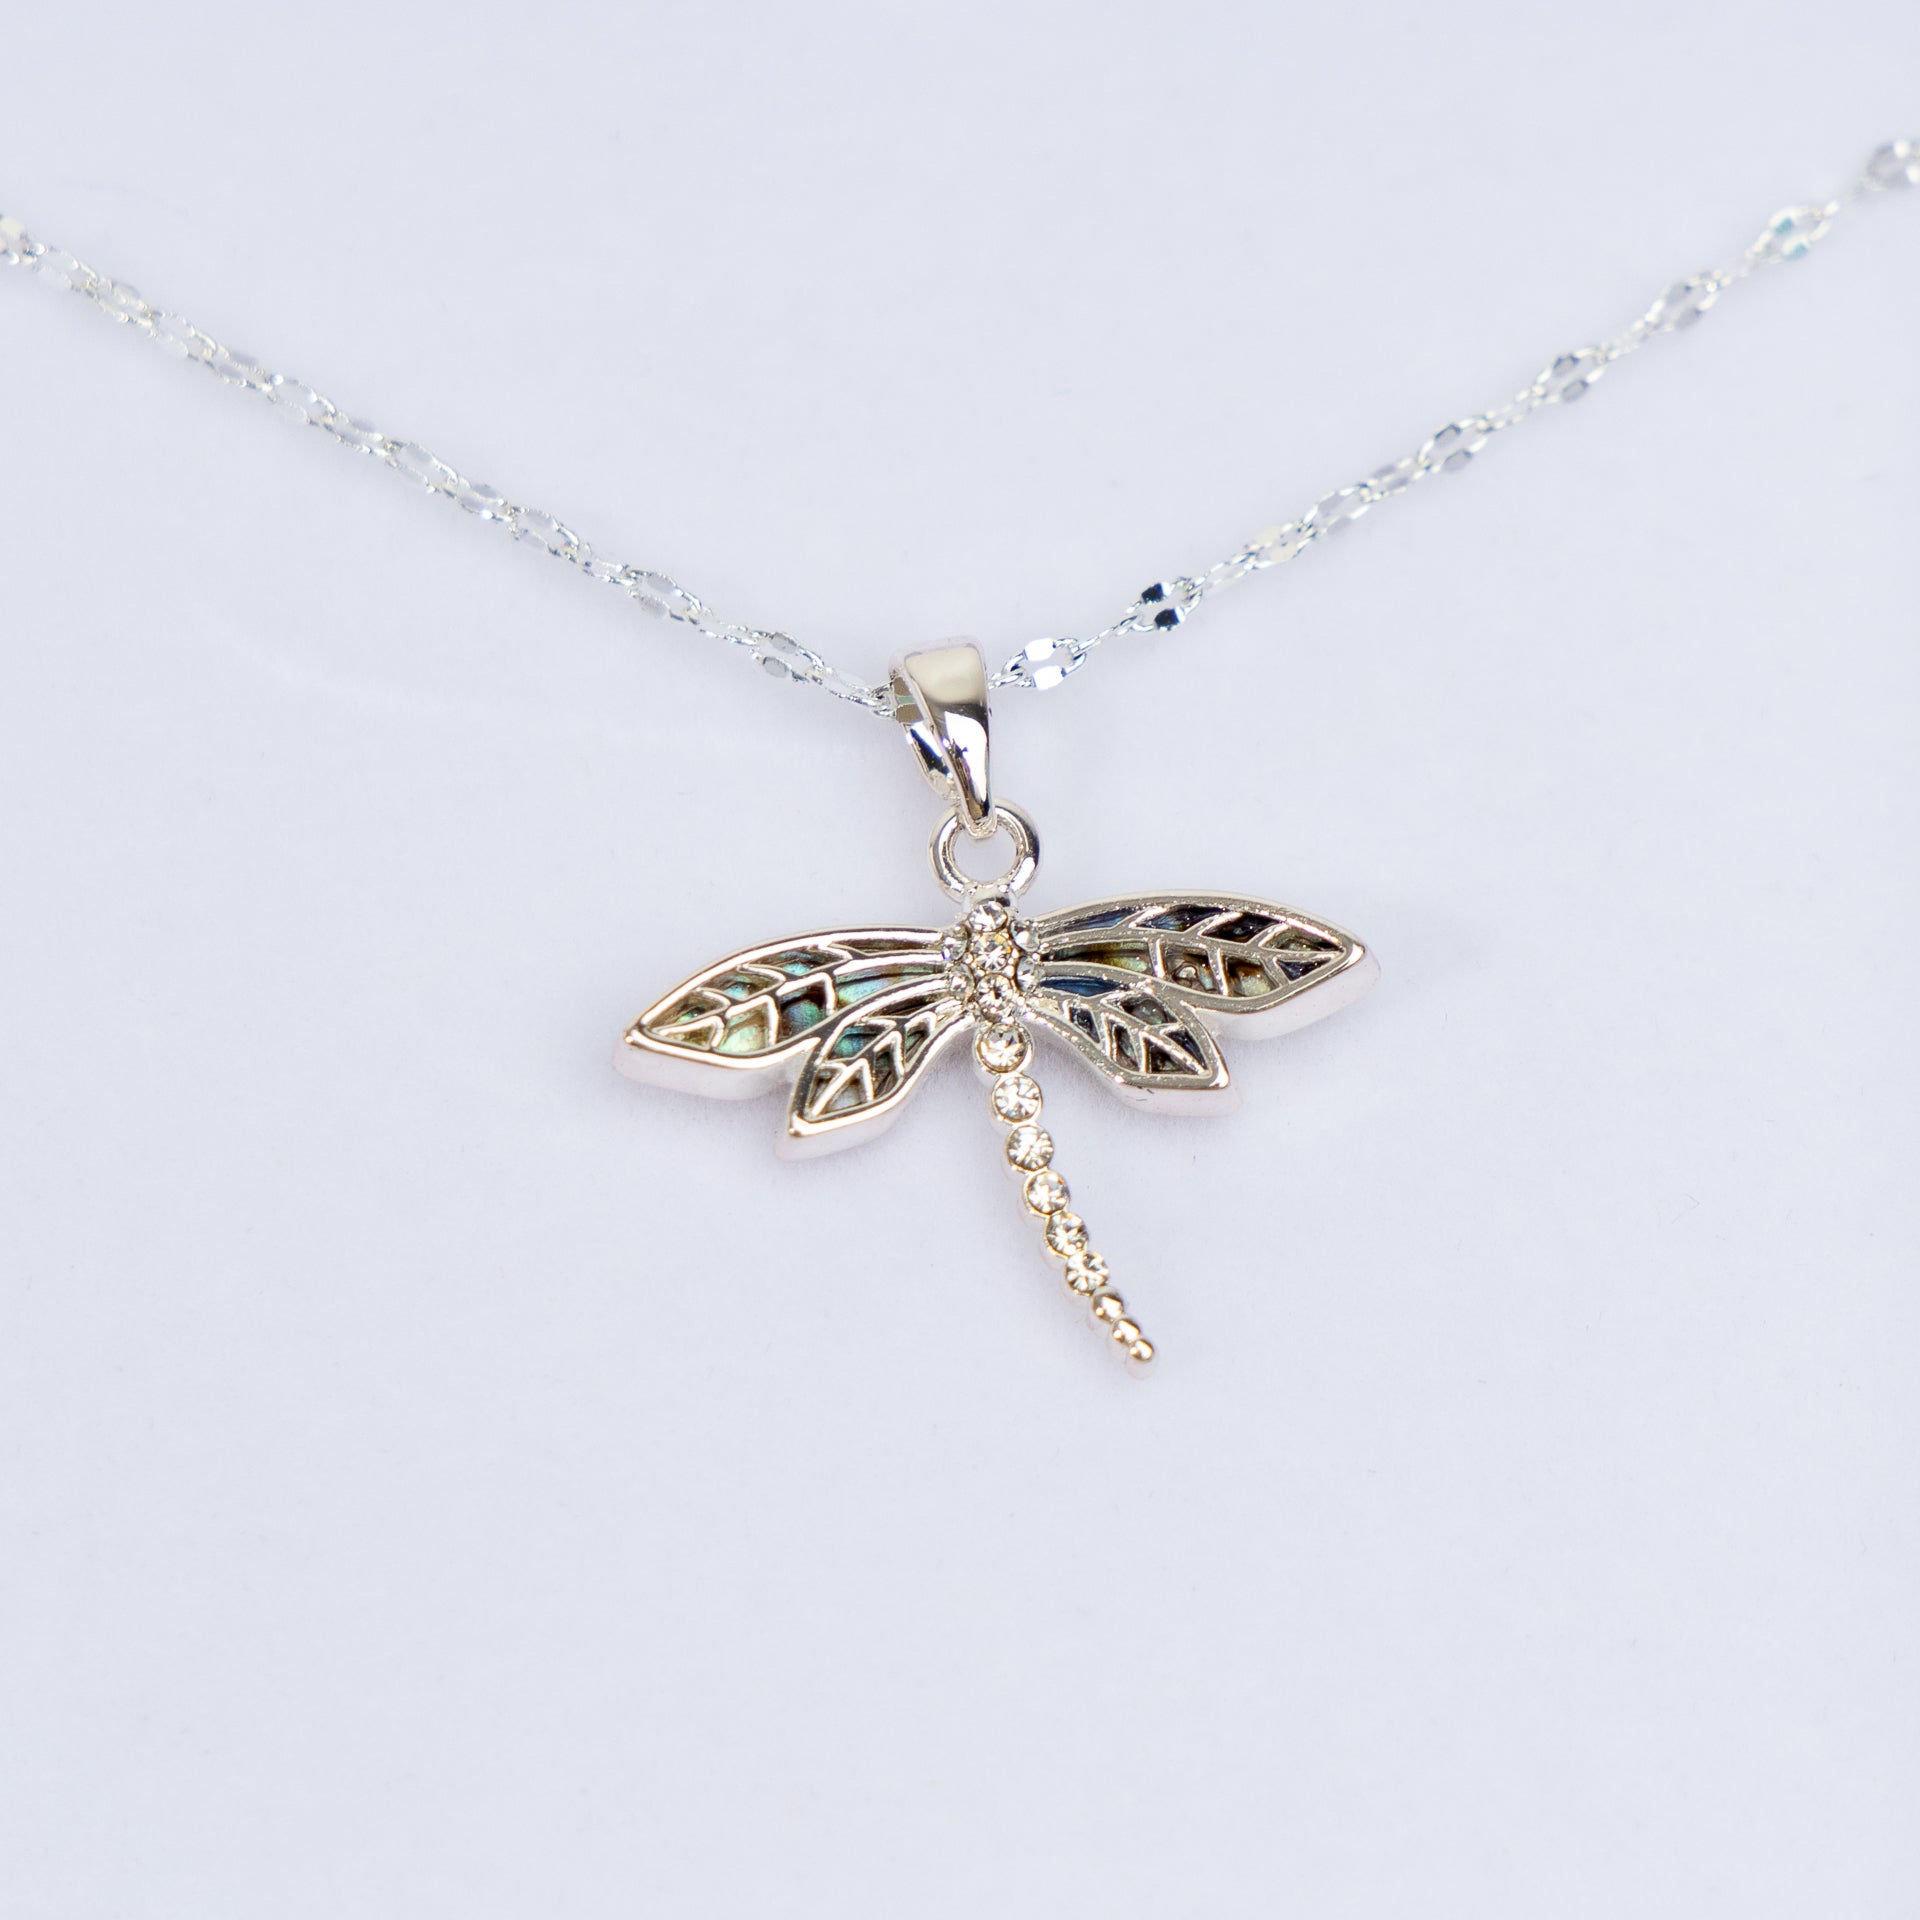 Pāua Shell Dragonfly Necklace